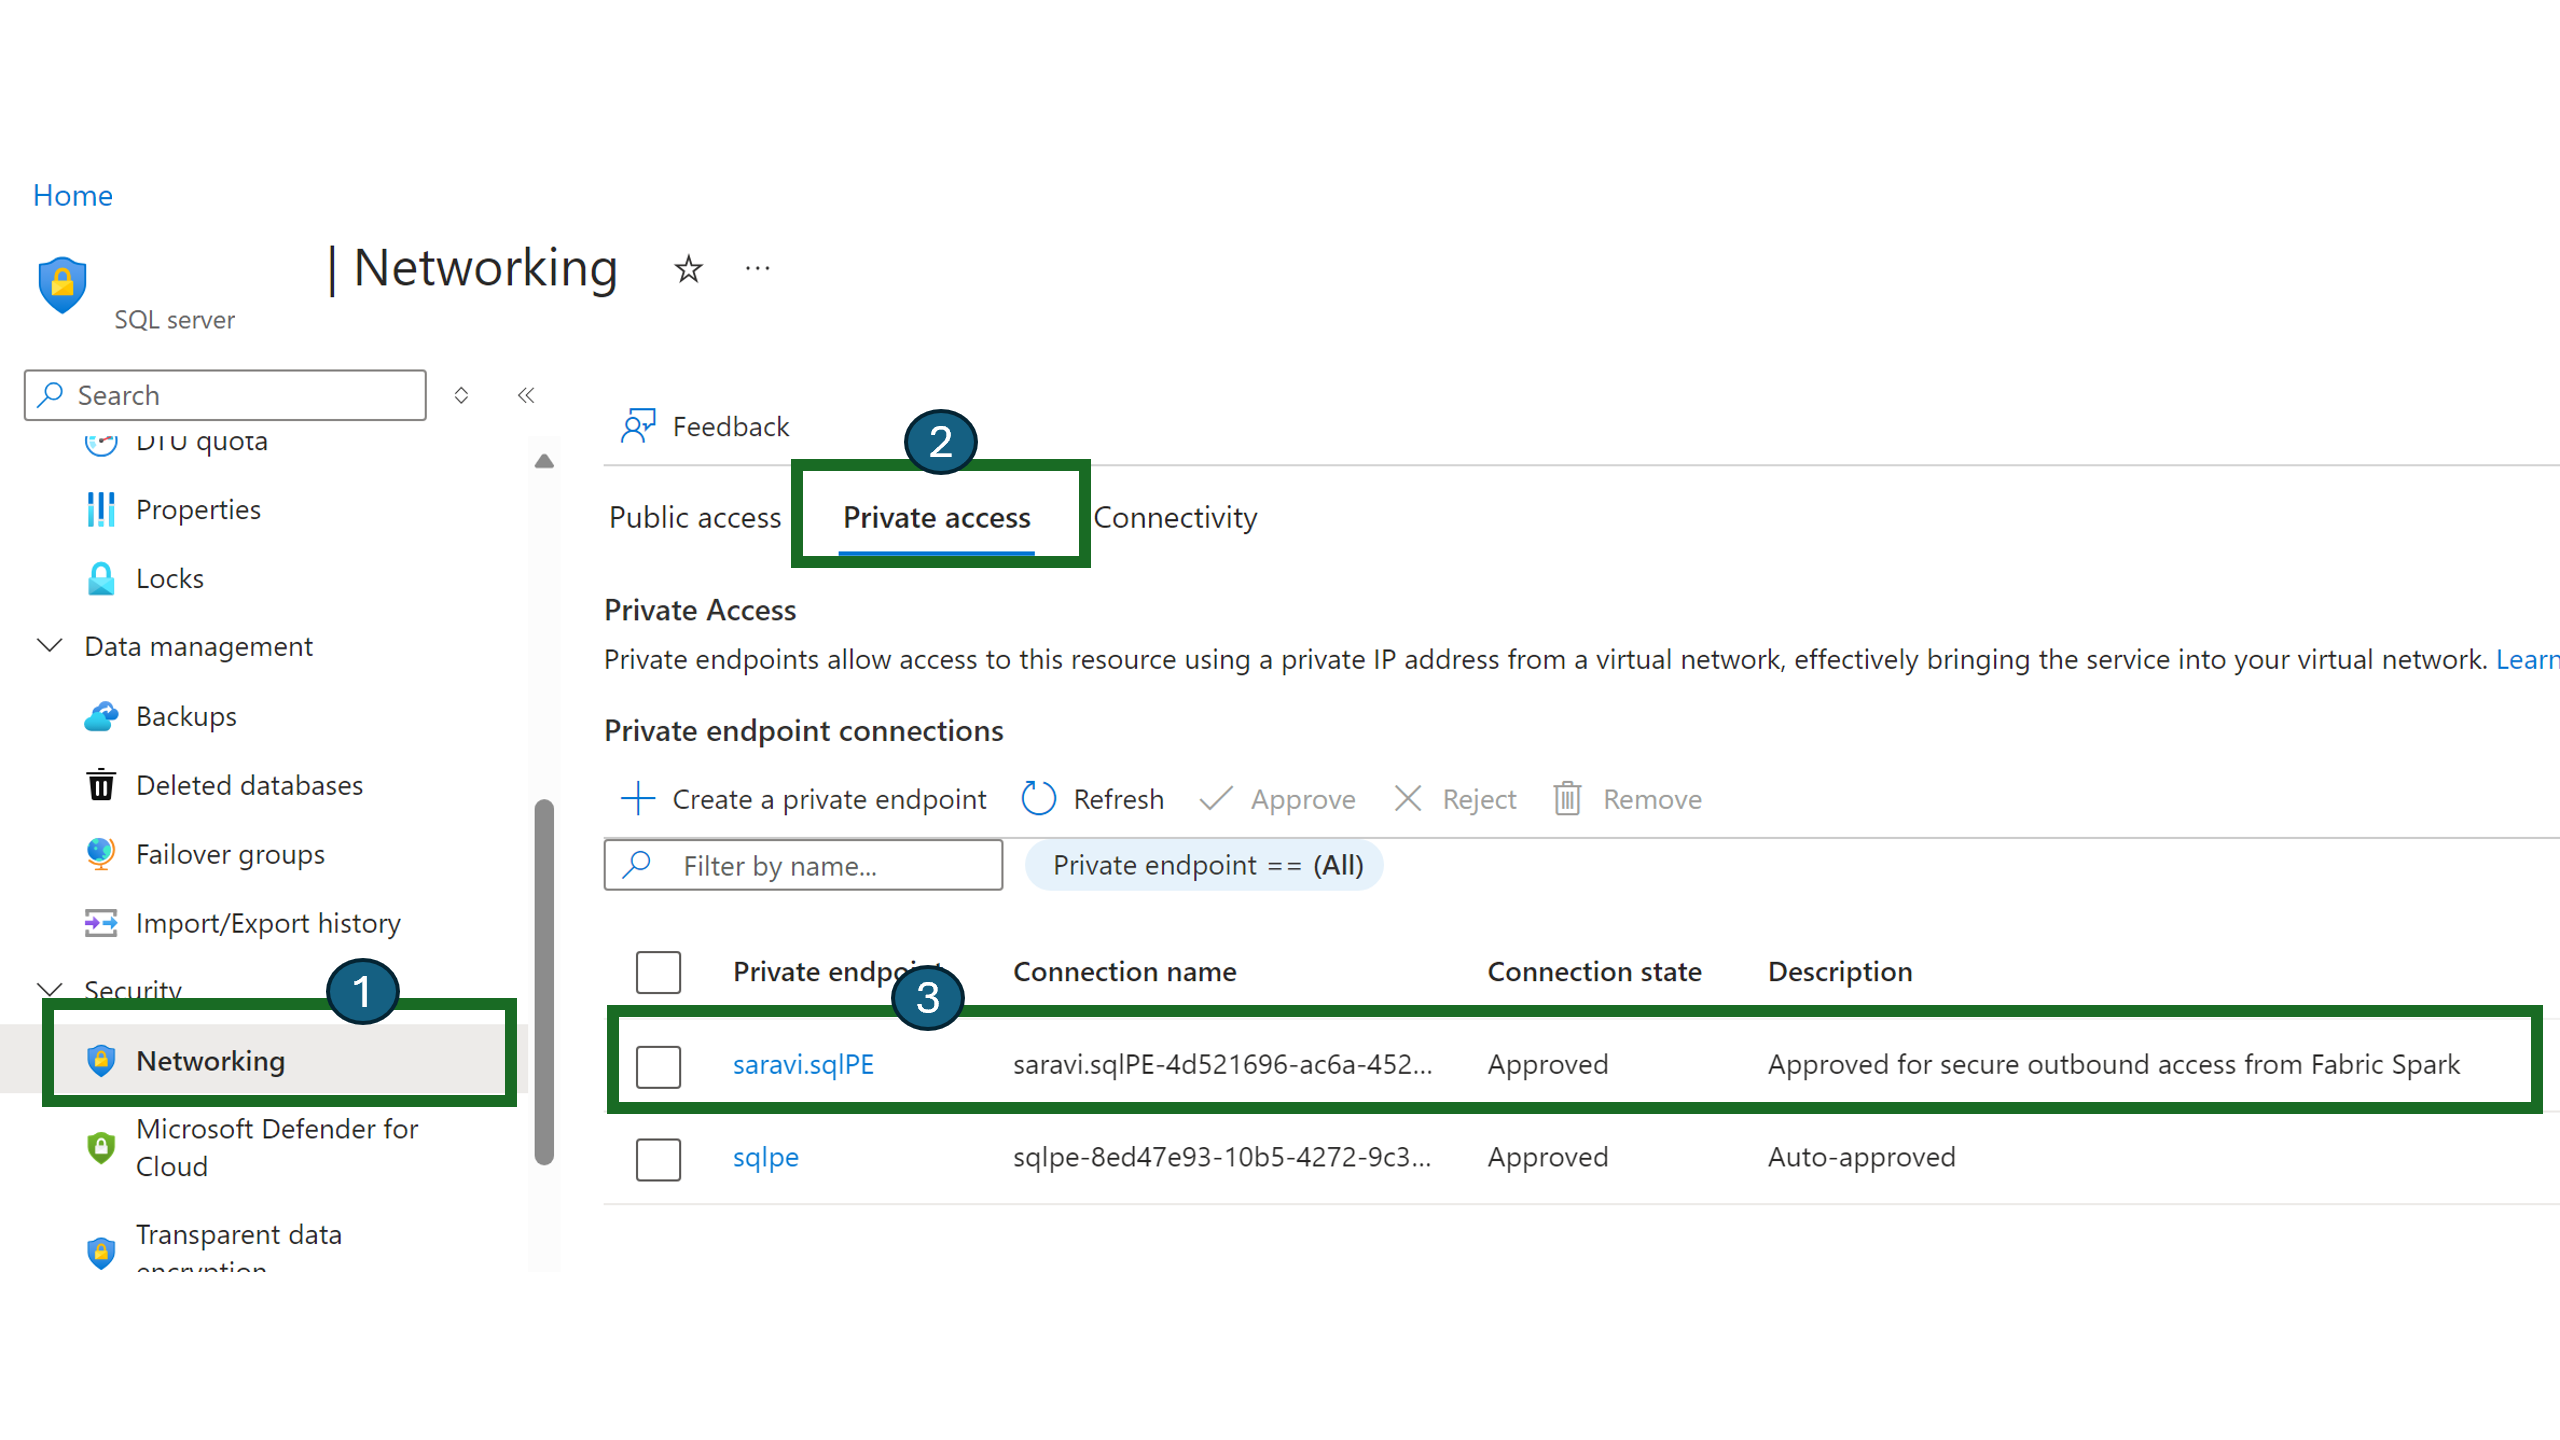 Screenshot showing the Private access tab on the Networking page of a resource in the Azure portal.